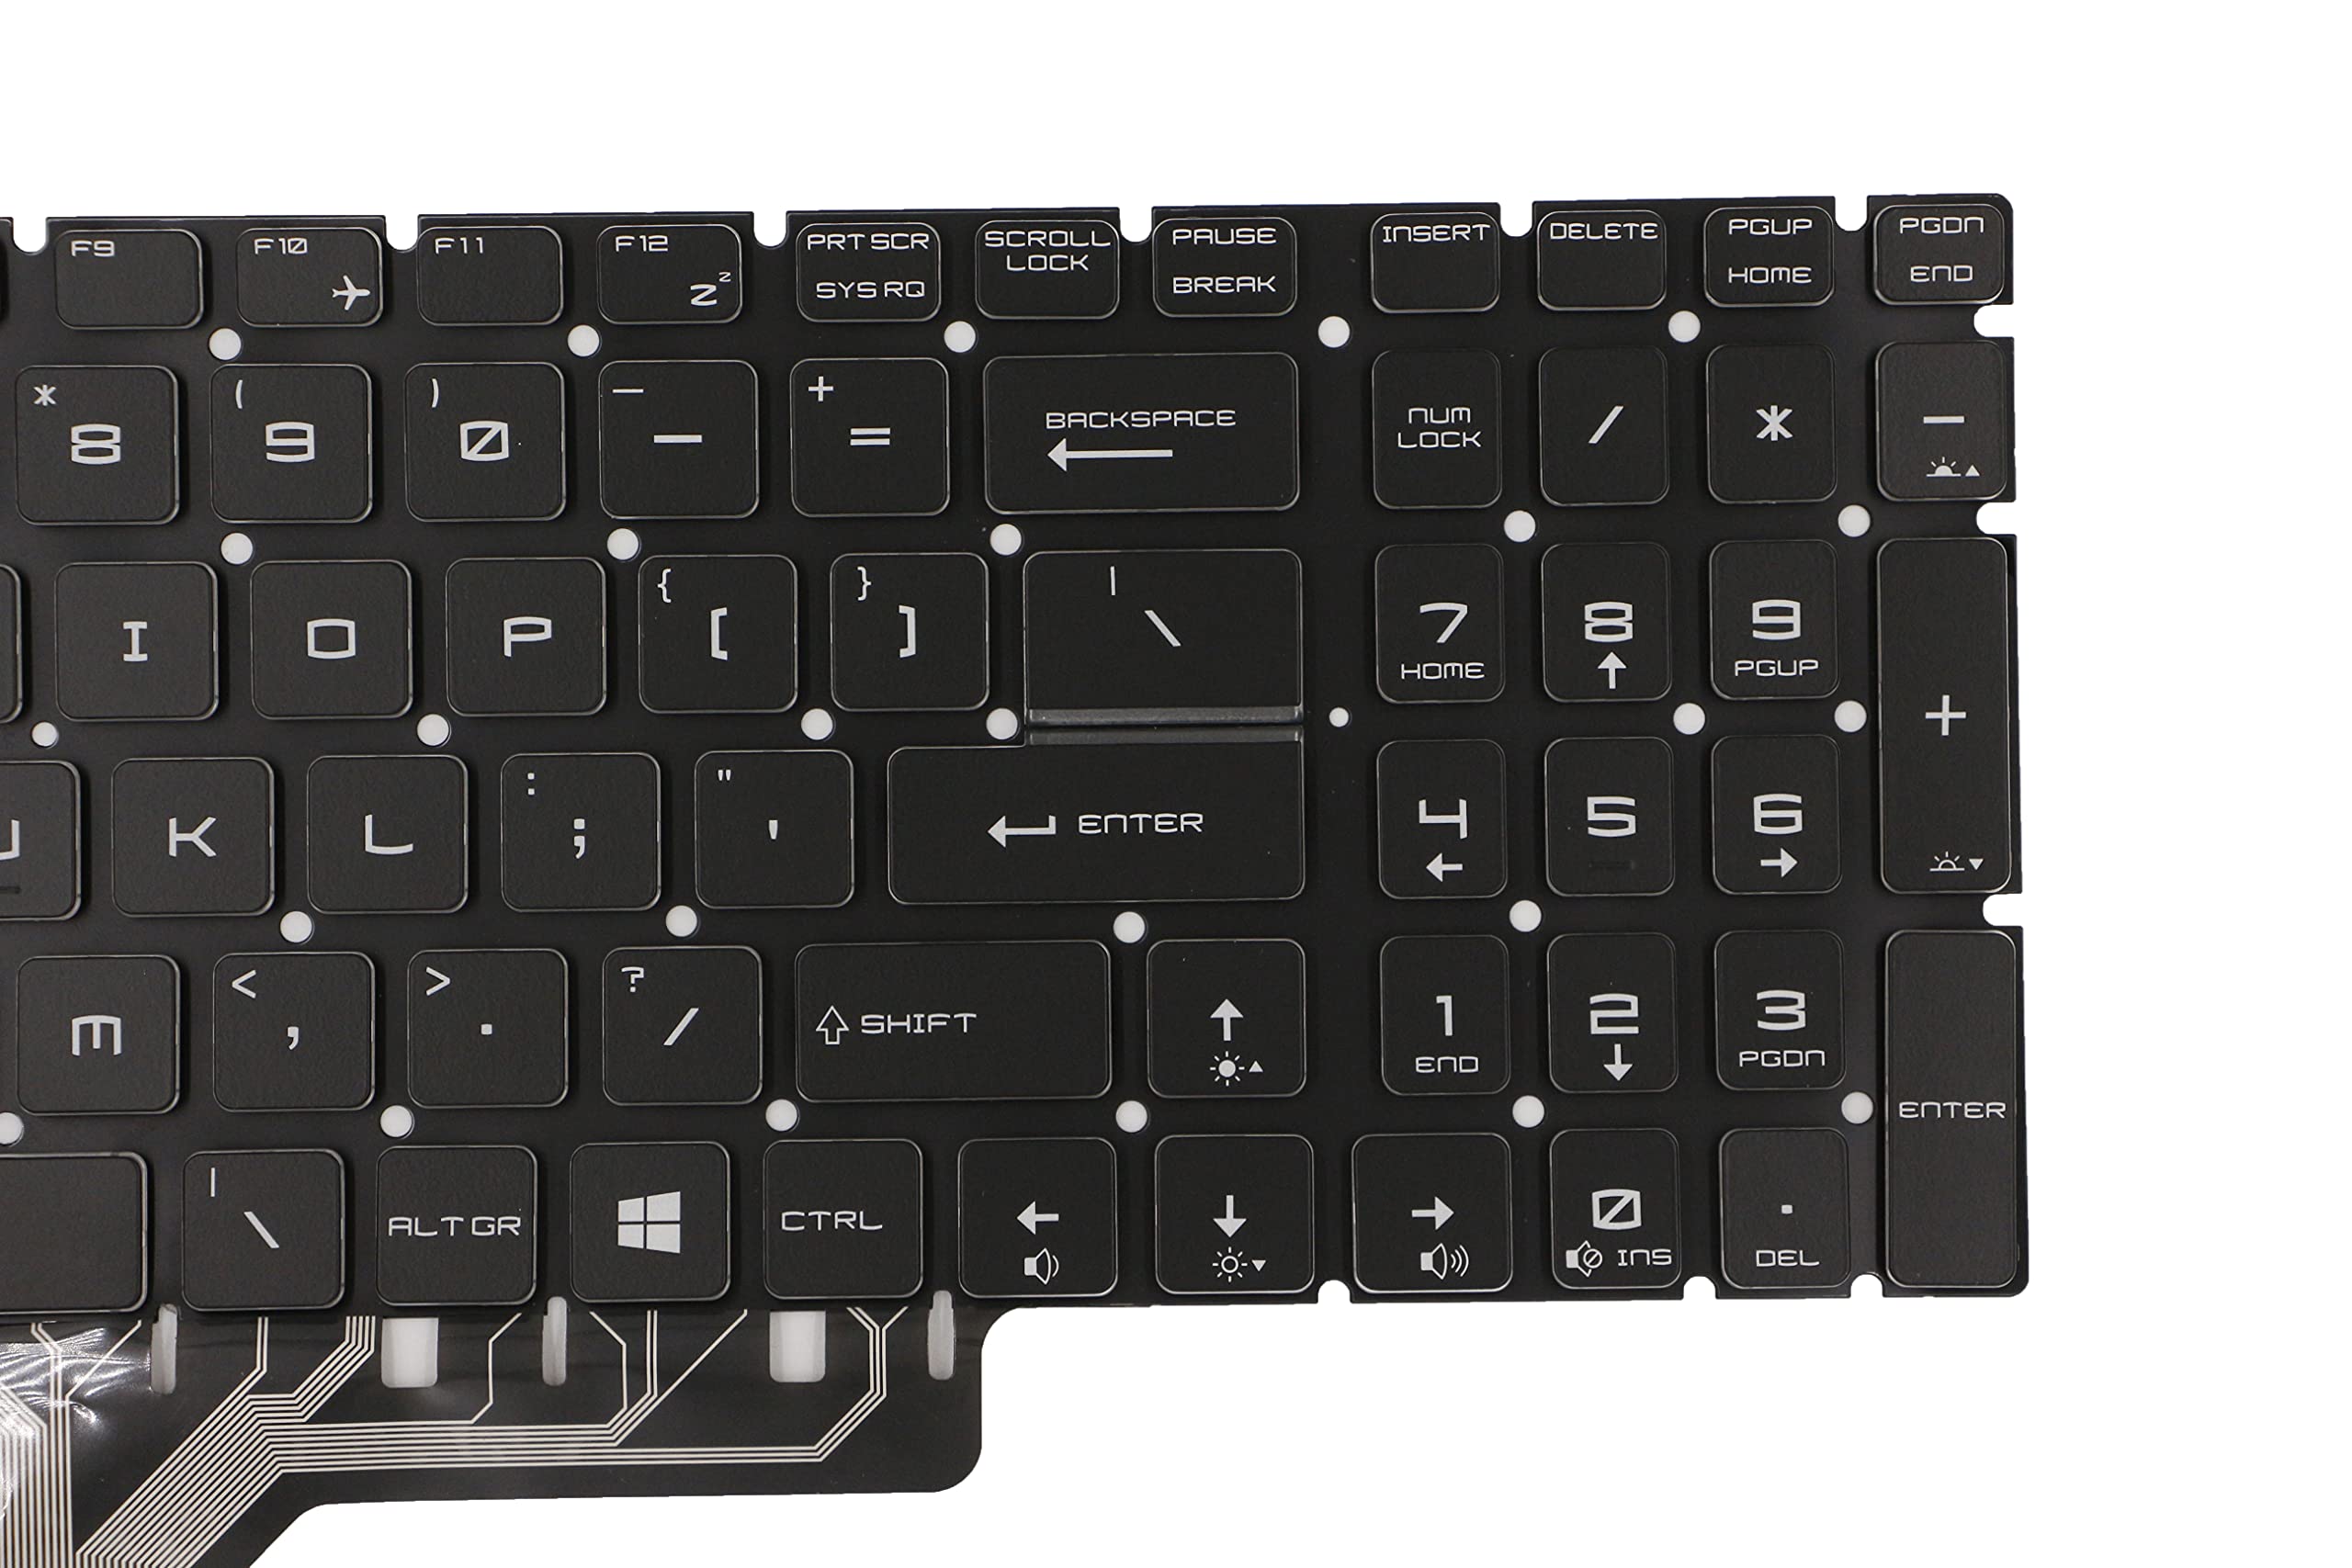 Replacement Keyboard for MSI GS75 GE75 GF75 GE72 GP75 GT72 GE72VR GL75 GL72 GP62 GL72 GL65 GL62 GL62M GL63 GS63 GS63VR GE63 GE62 Series Laptop with Backlit US Layout